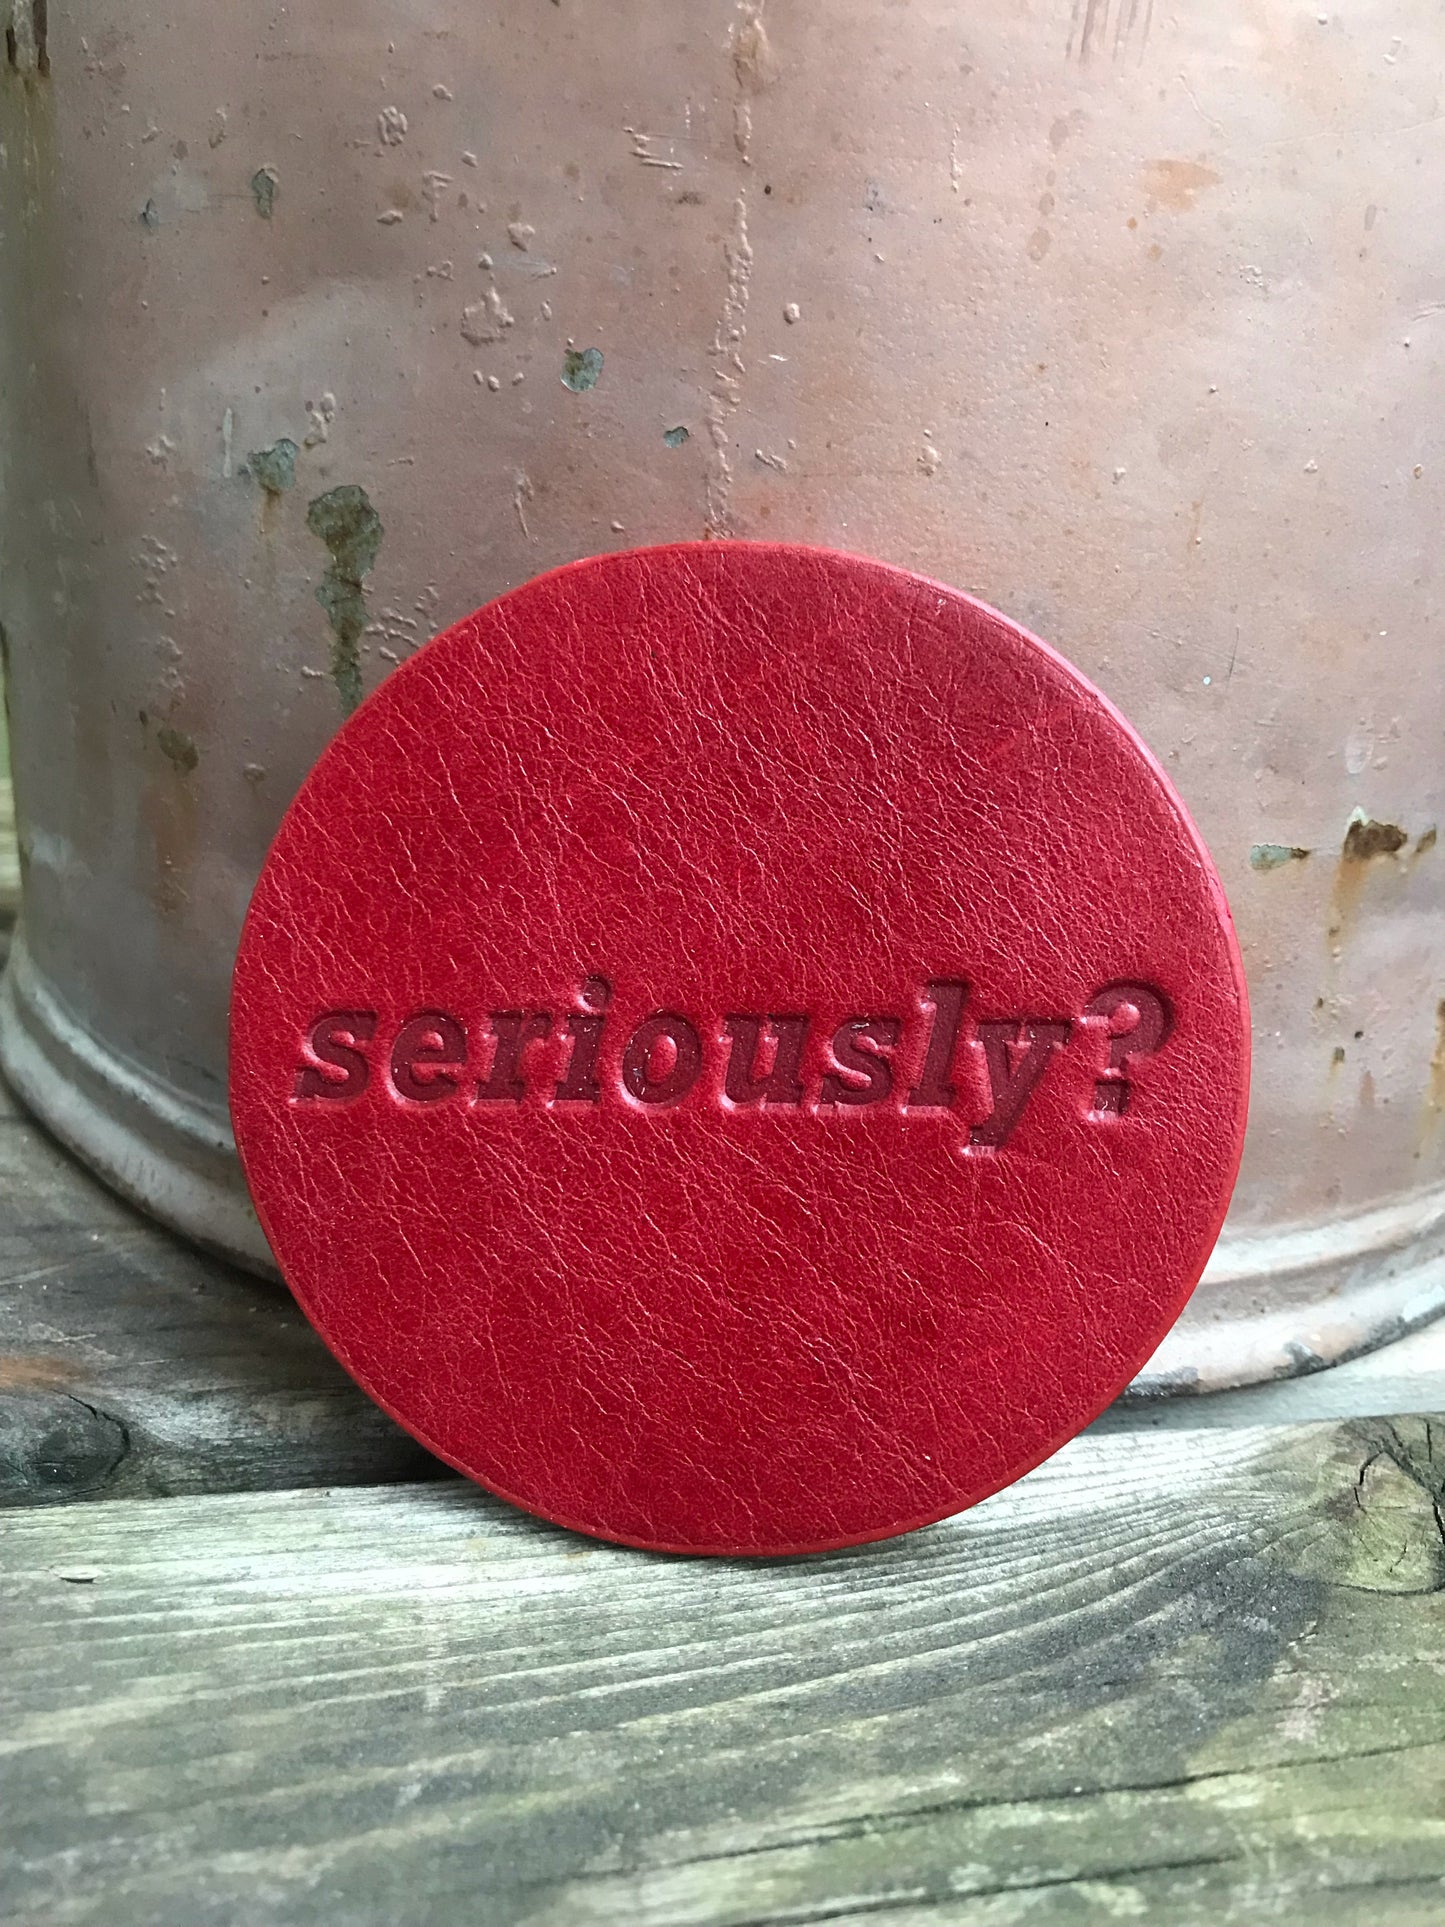 Leather Coaster - Seriously